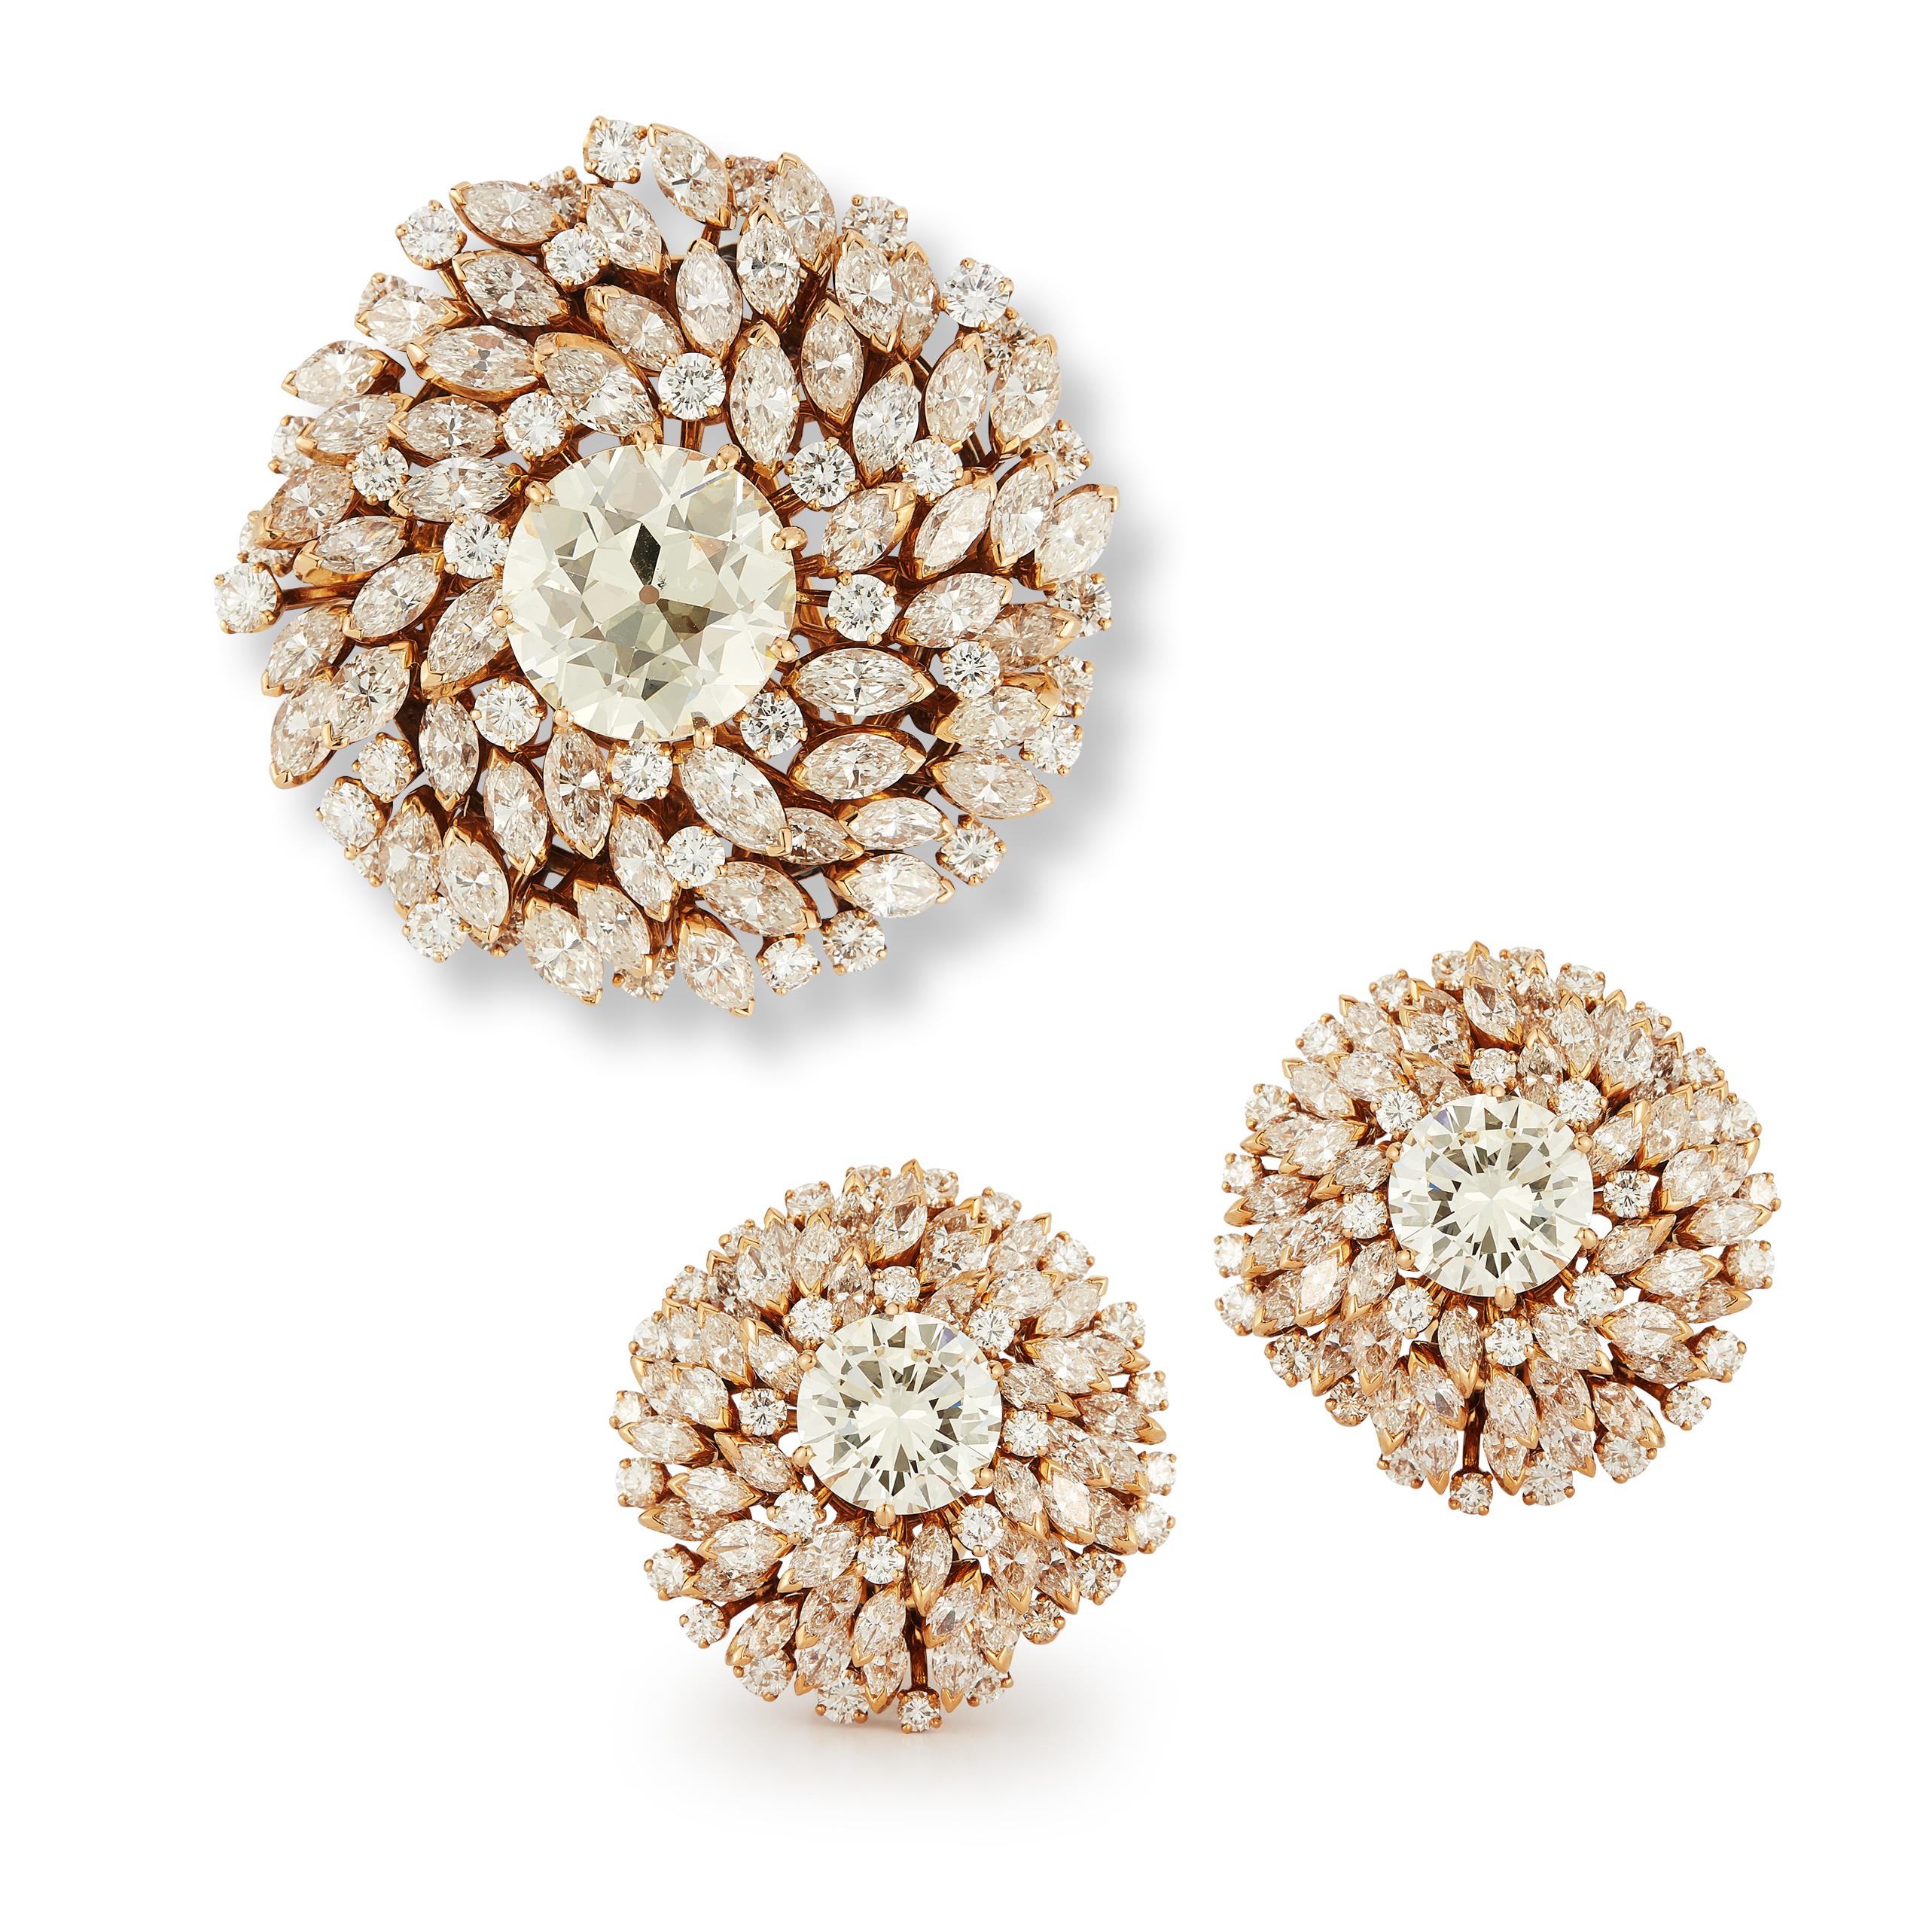 Bulgari Diamond Brooch & Earrings Set 

Brooch: 
1 Old European Cut diamond approximately over 9.00 carat
Set with 58 marquise cut and 38 round cut diamonds 

Earrings:
2 center Round diamond weigh approximately 3.00 cts  each
Set with 92 marquise